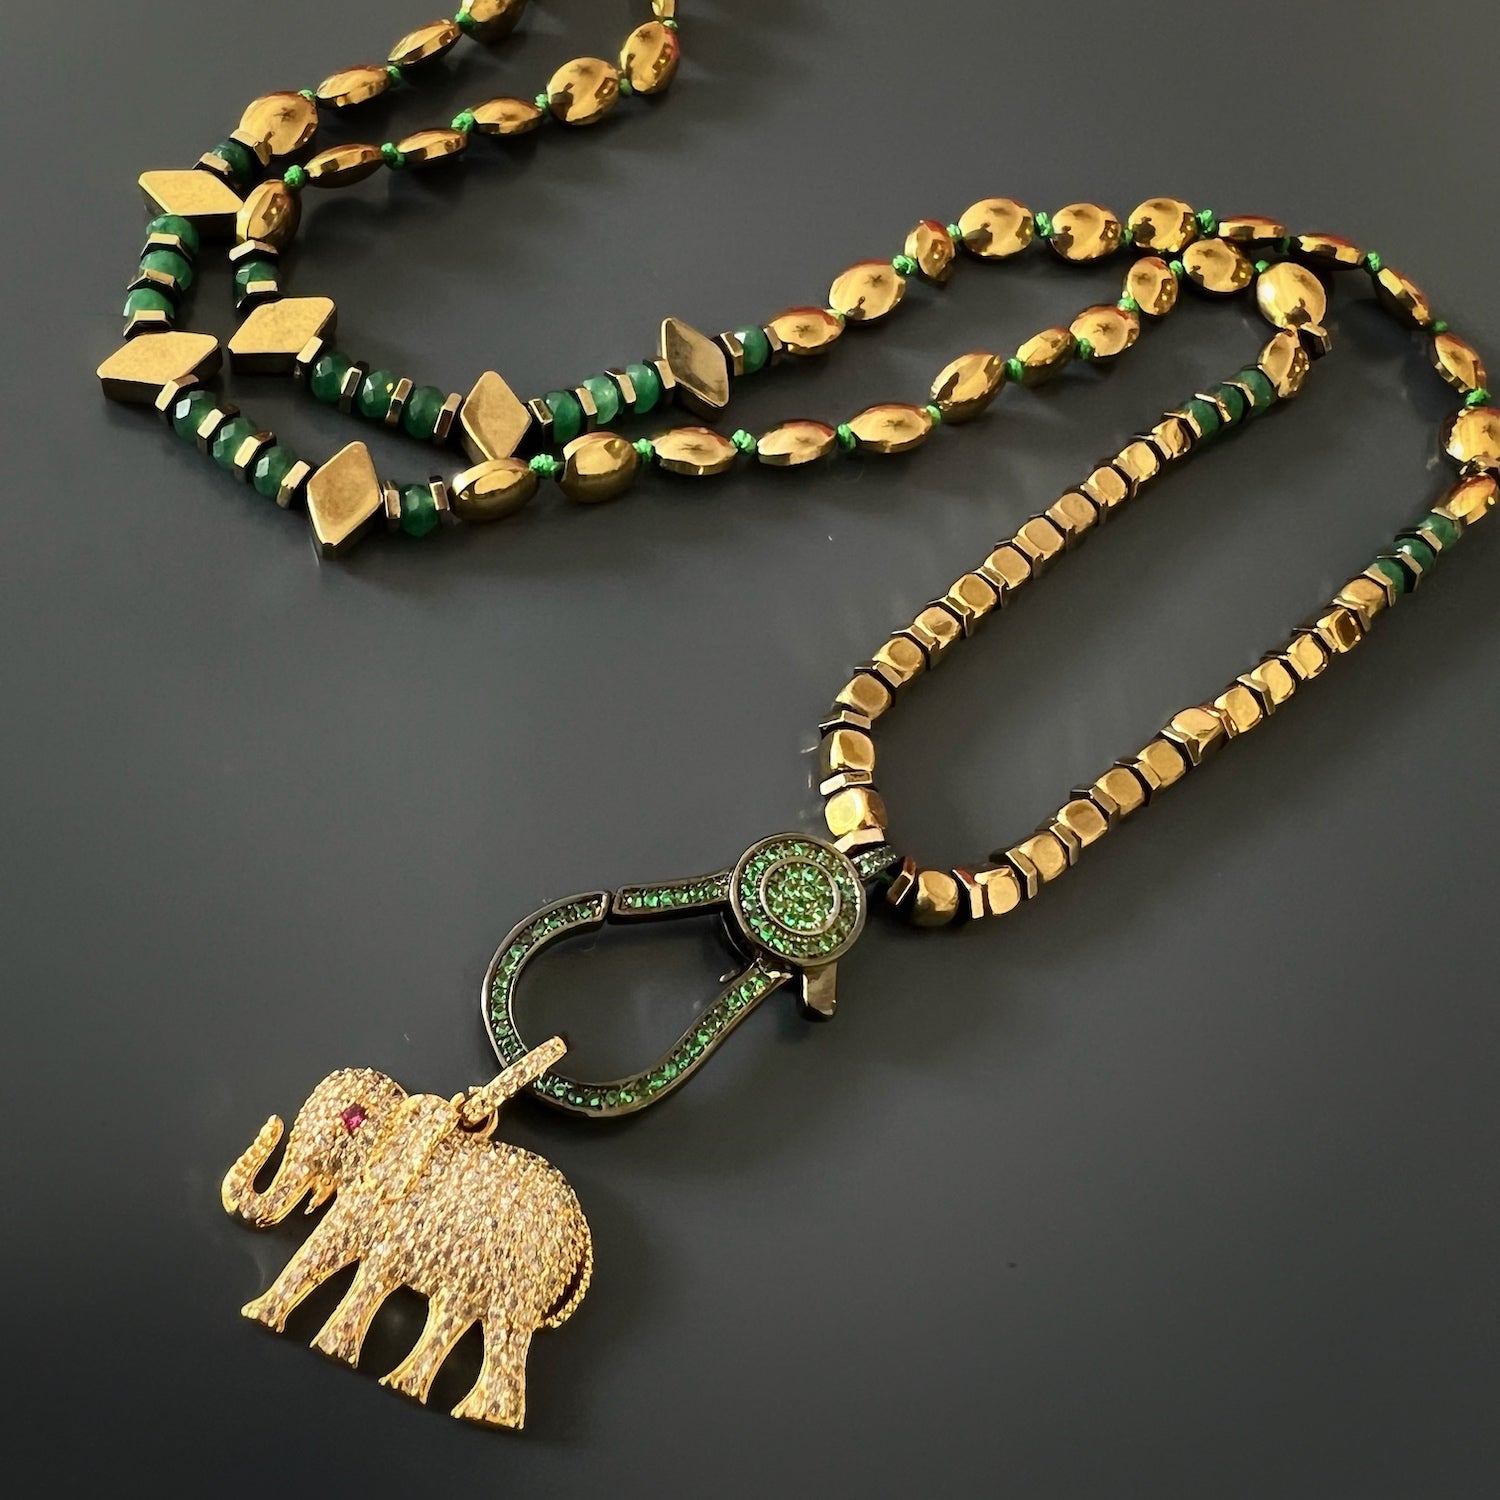 The diamond elephant golden necklace is a stunning piece of jewelry that is both elegant and unique. It&#39;s sure to make a statement and turn heads wherever you go.